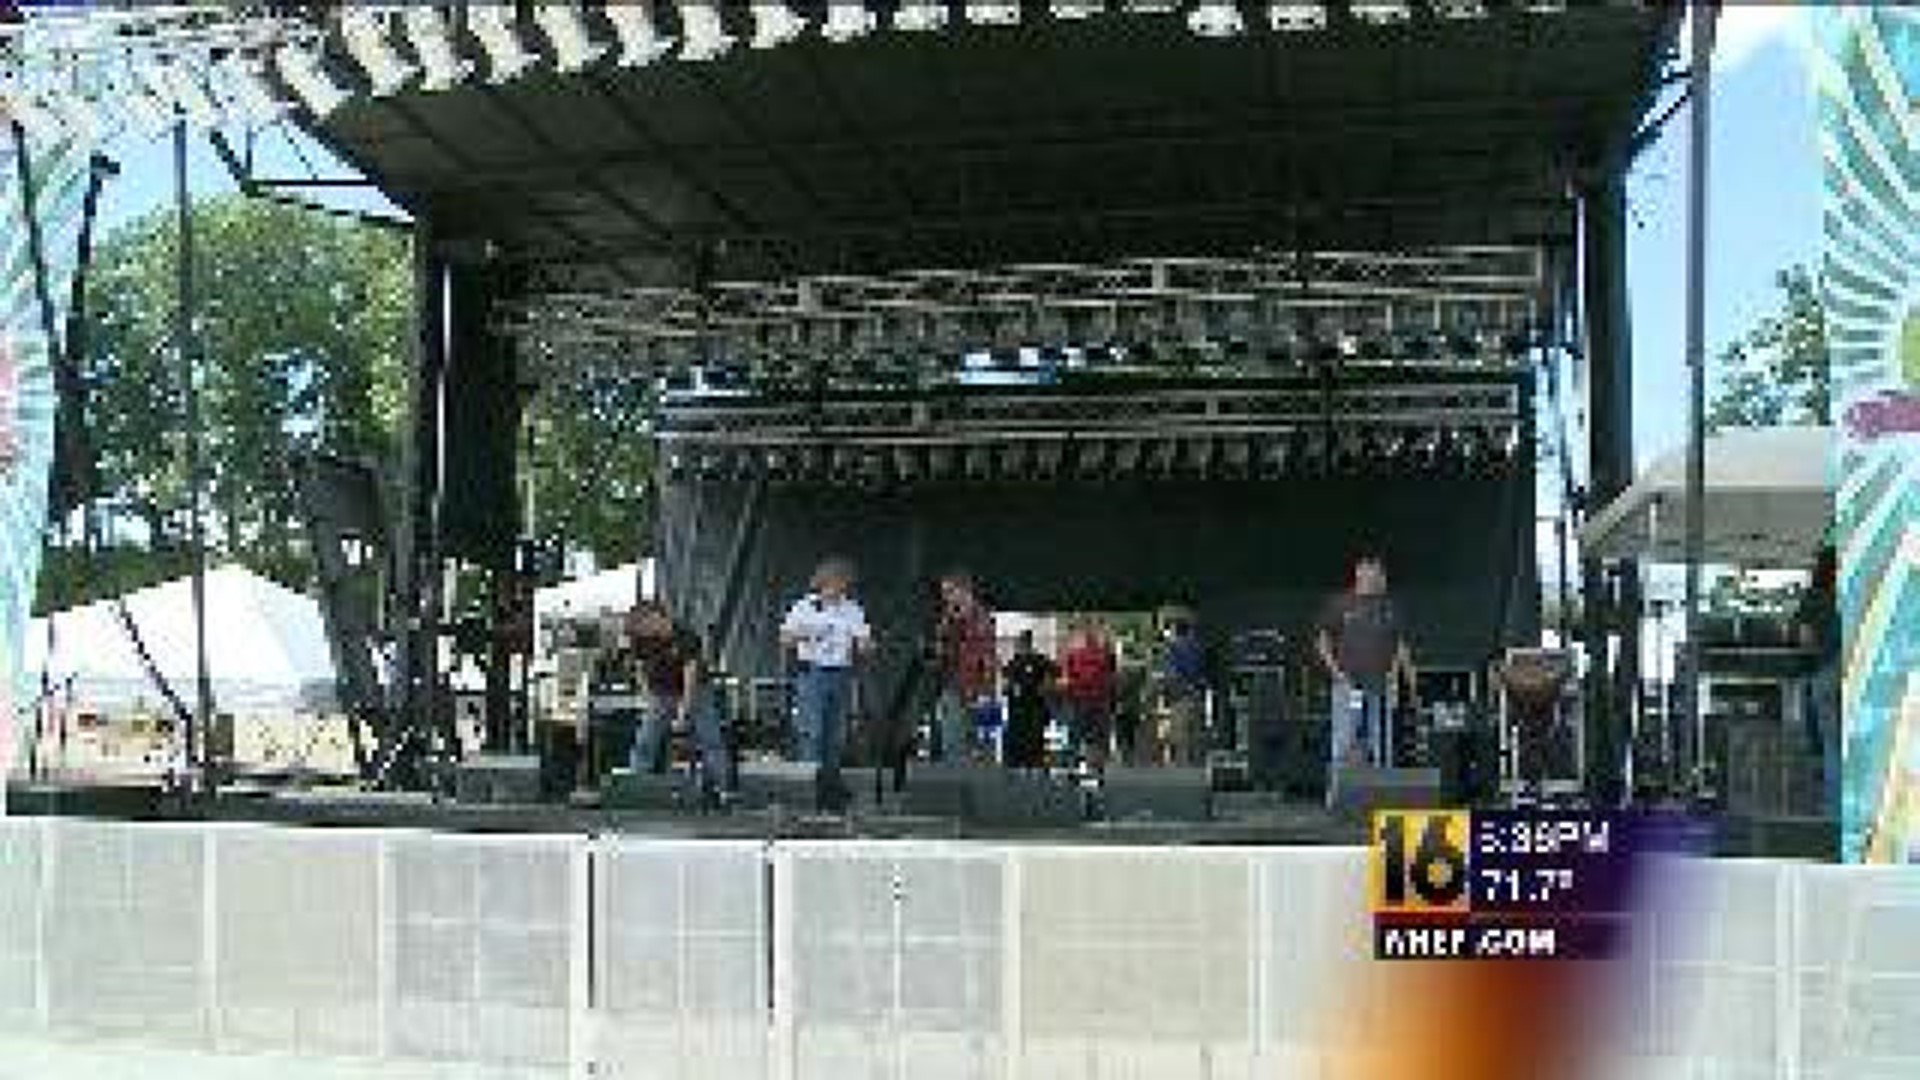 Thousands Camp Out for Peach Music Festival